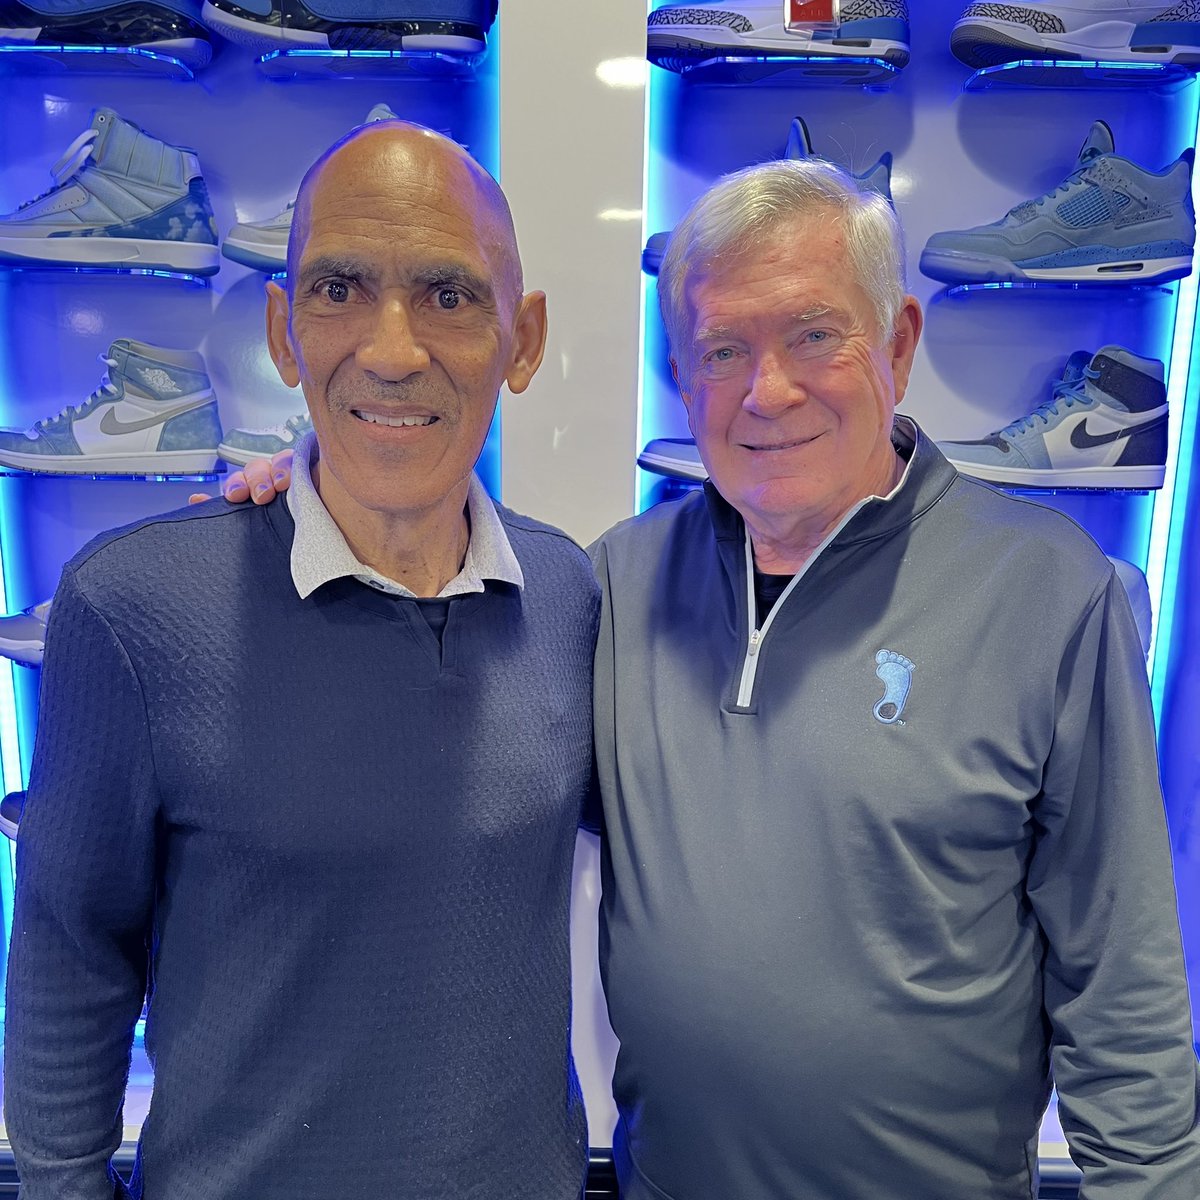 We’re blessed to have Coach Dungy with us today to share his wisdom with our staff, team and the great high school coaches coming to our clinic. His experiences are uncommon and we’ll all benefit from learning more about them. 🩵🙏🩵